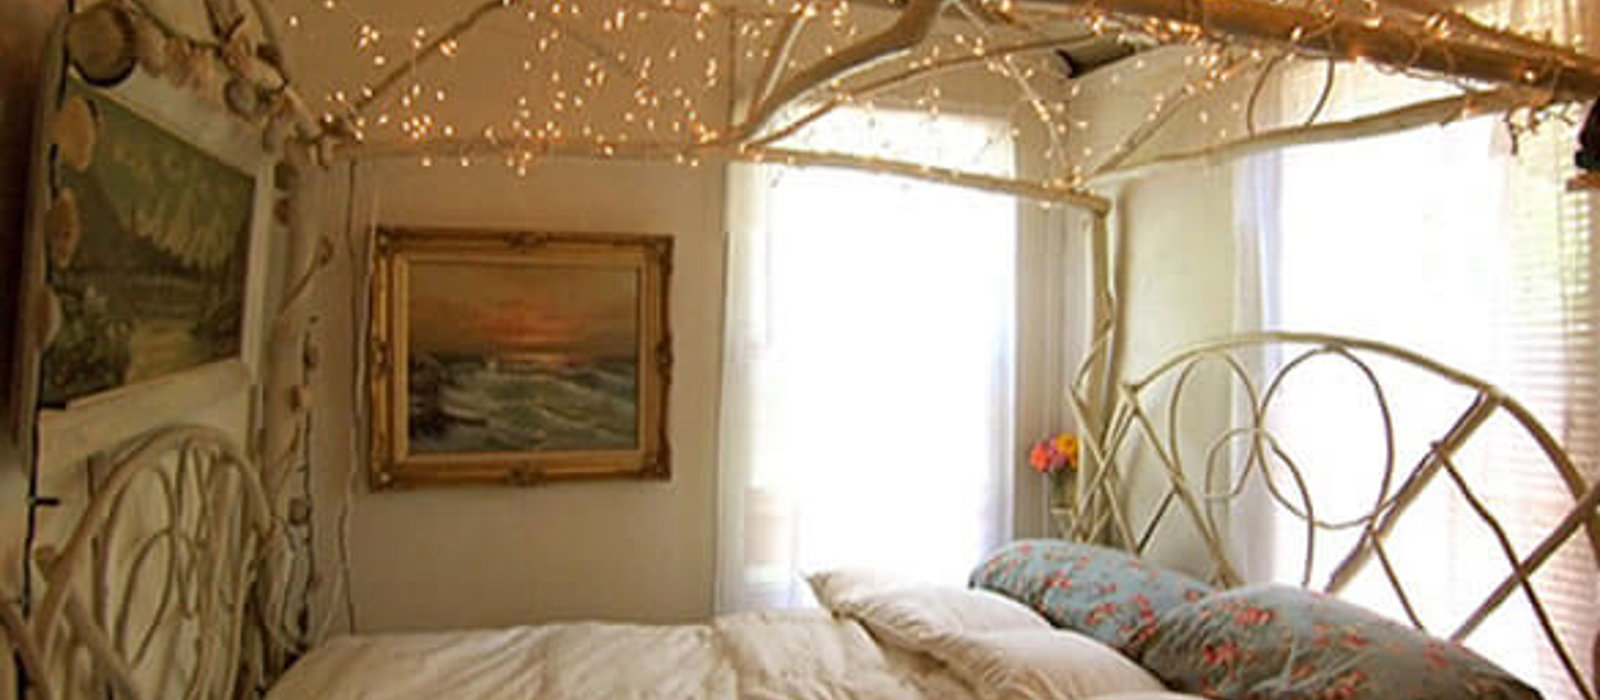 Cosy bedroom with fairylights canopy and Duette blinds for light control